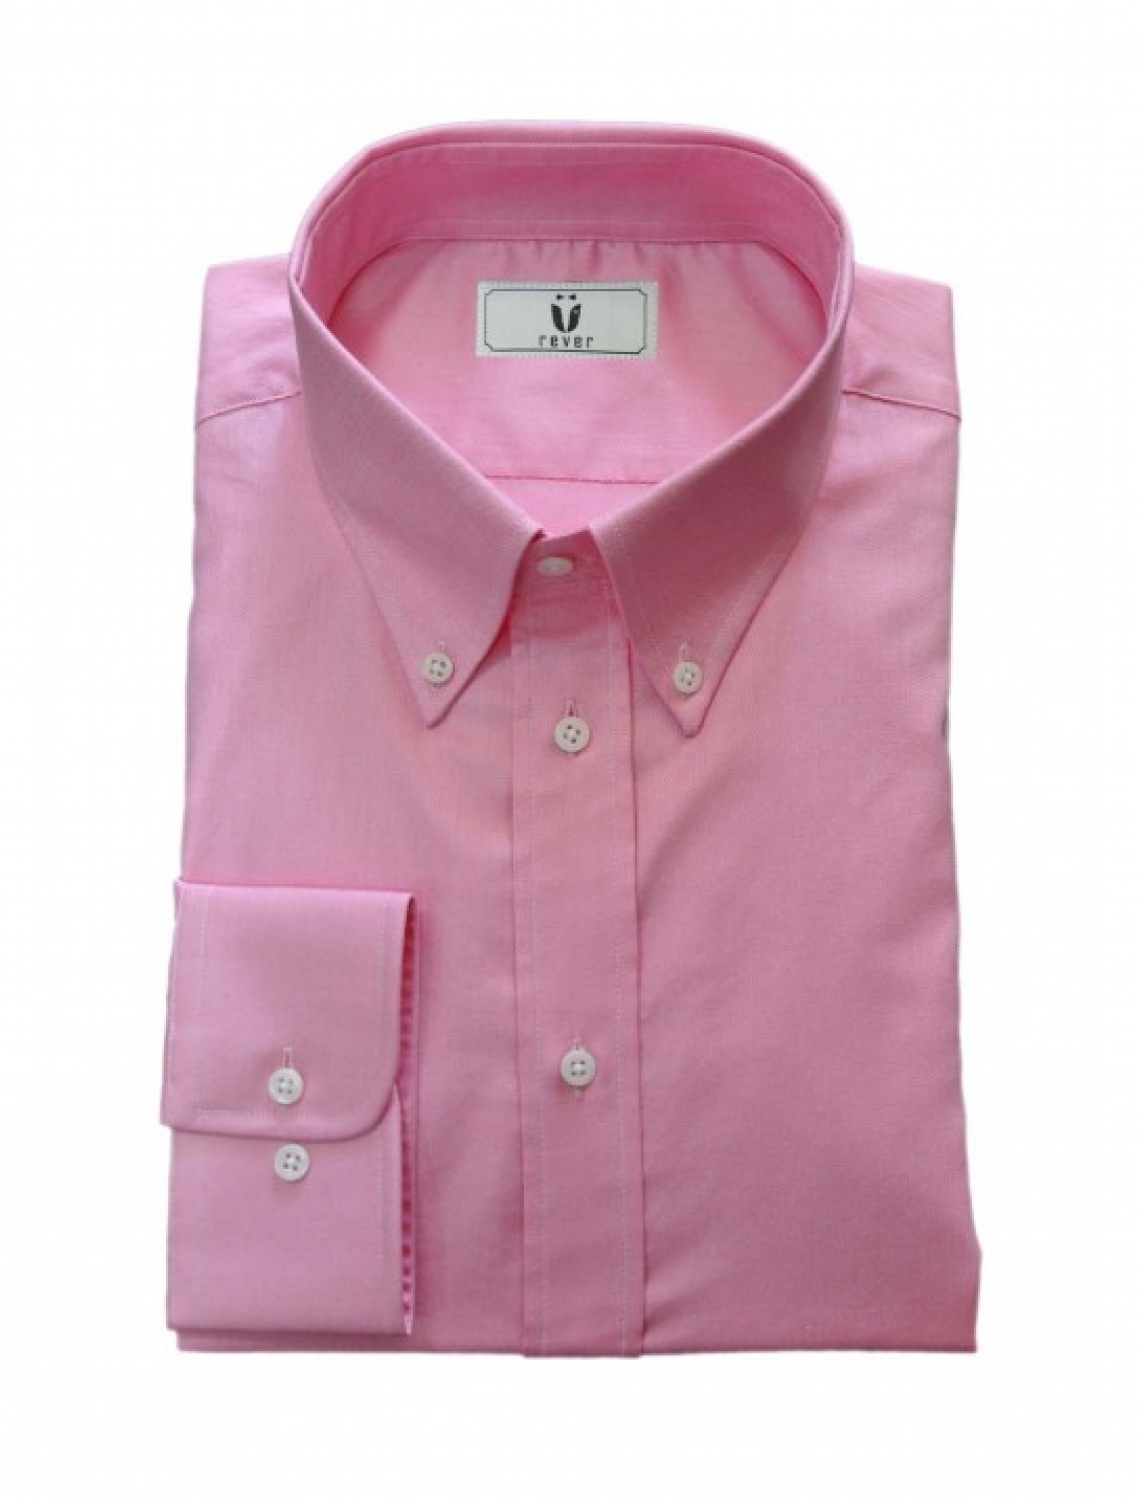 Rever smart casual pink